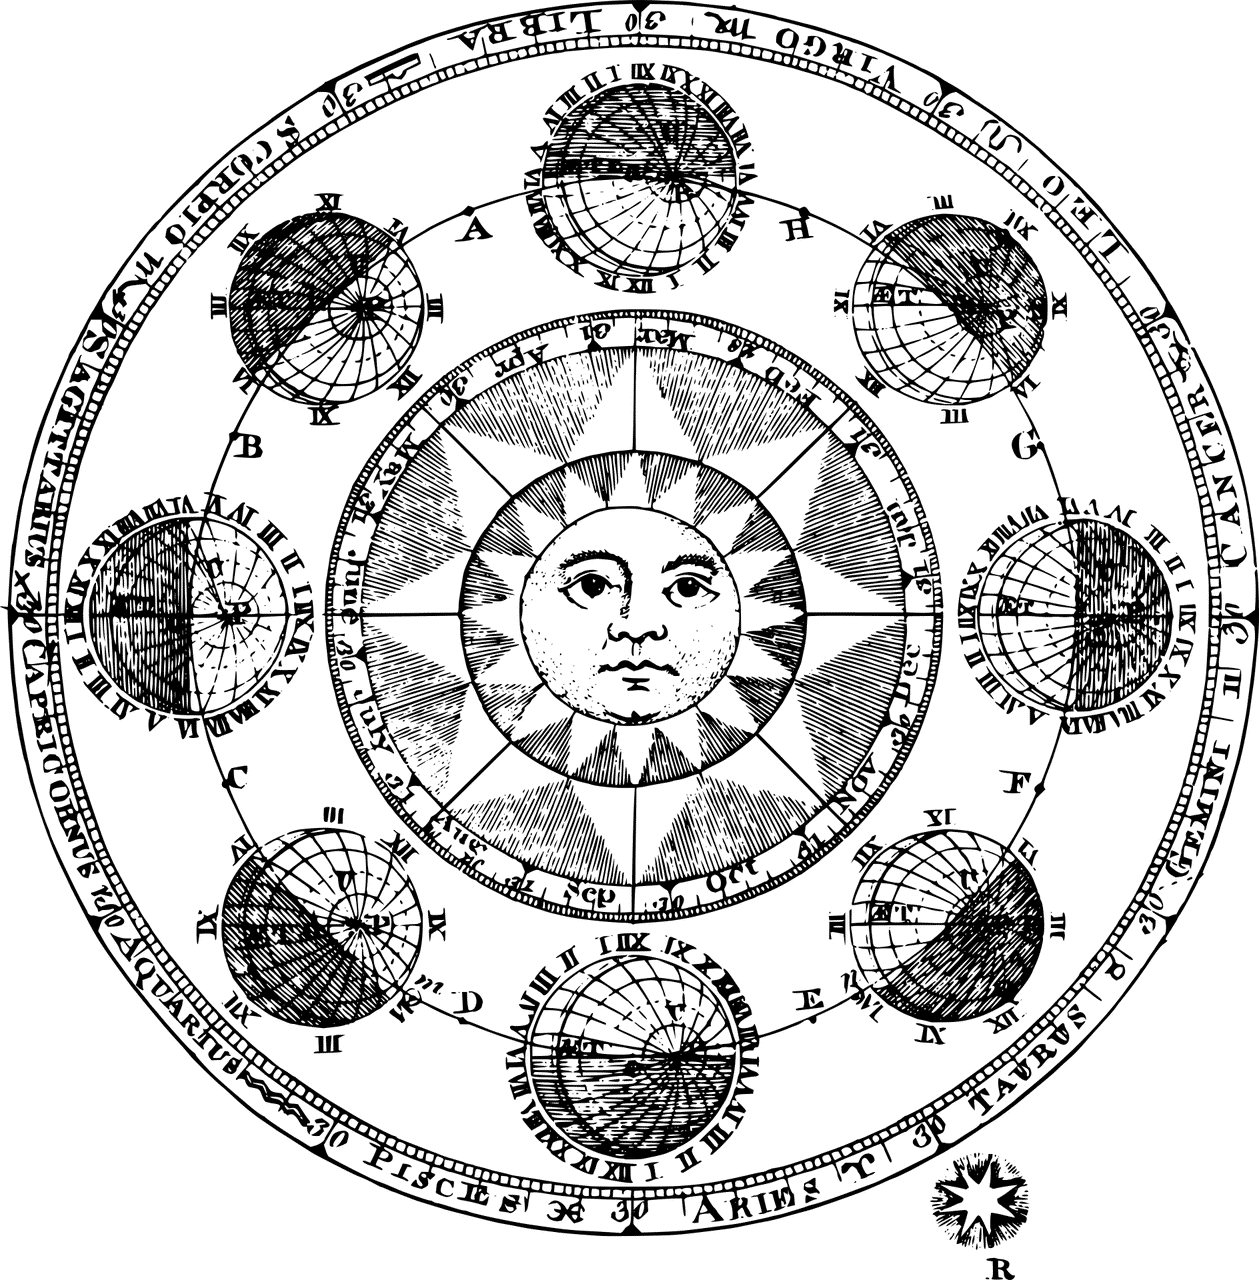 Astrologers in Bangalore